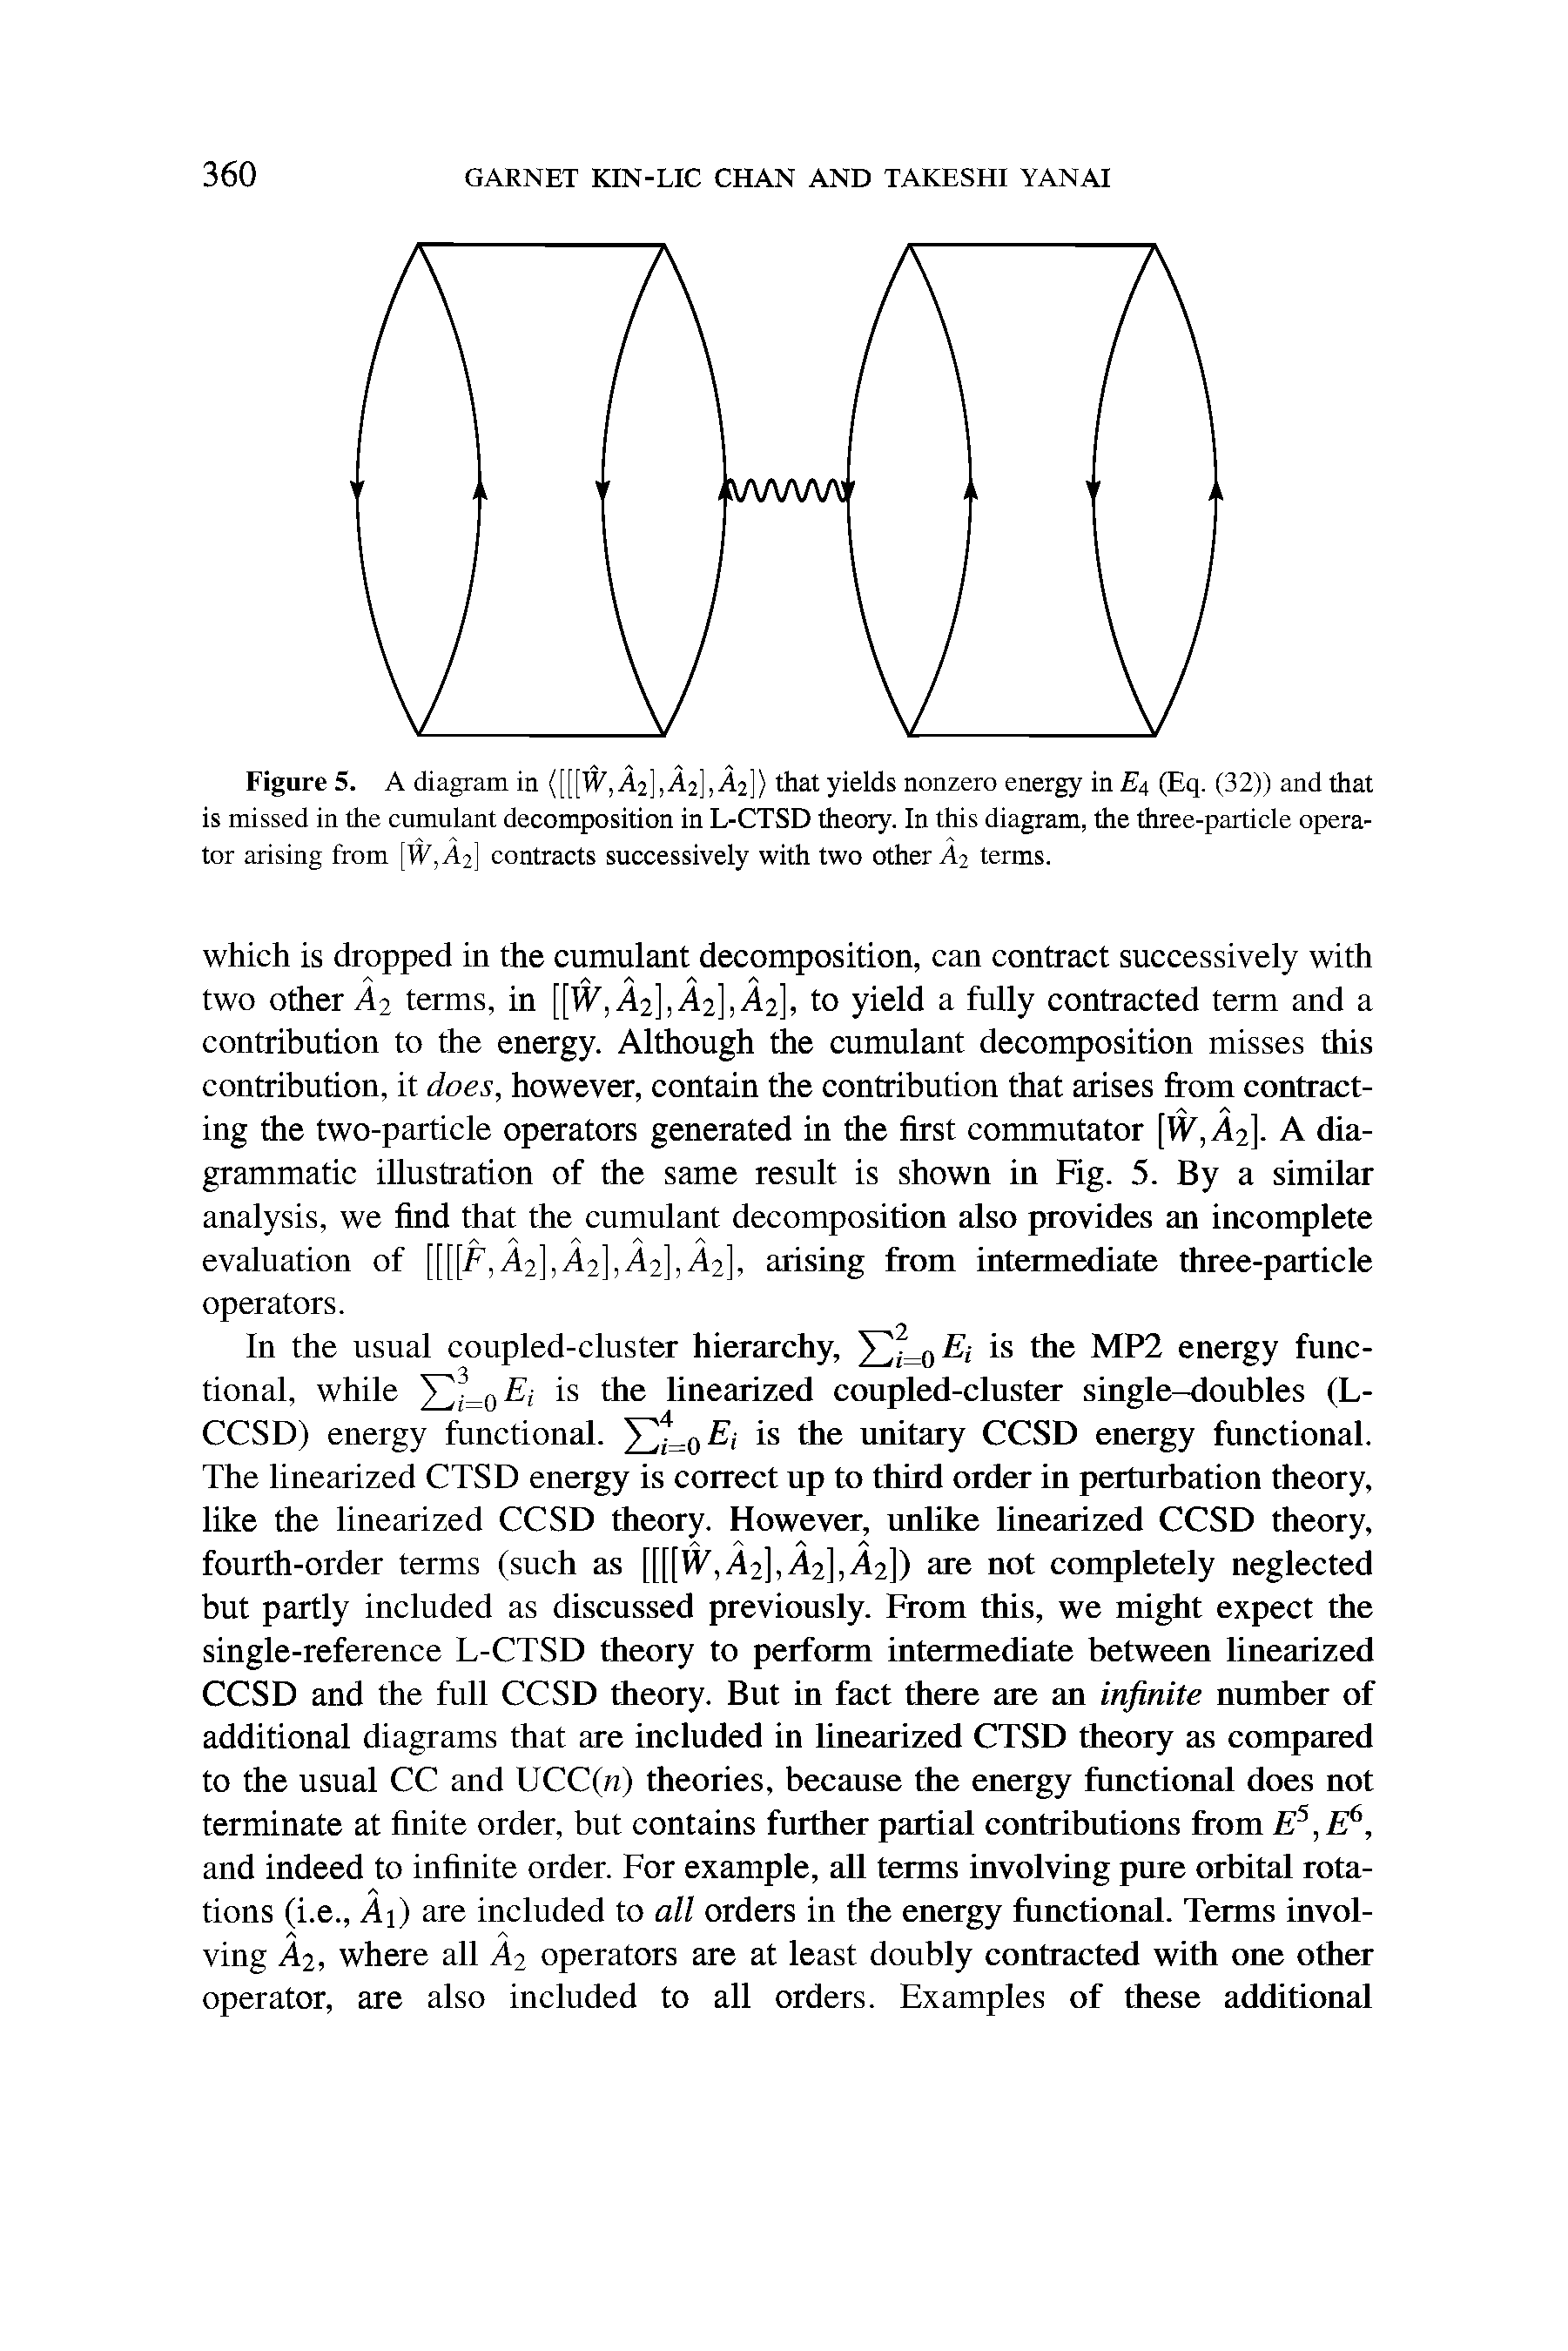 Figure 5. A diagram in ([[[iy,A2],A2],A2]) that yields nonzero energy in 4 (Eq. (32)) and that is missed in the cumulant decomposition in L-CTSD theory. In this diagram, the three-particle operator arising from [W,A2] contracts successively with two other A2 terms.